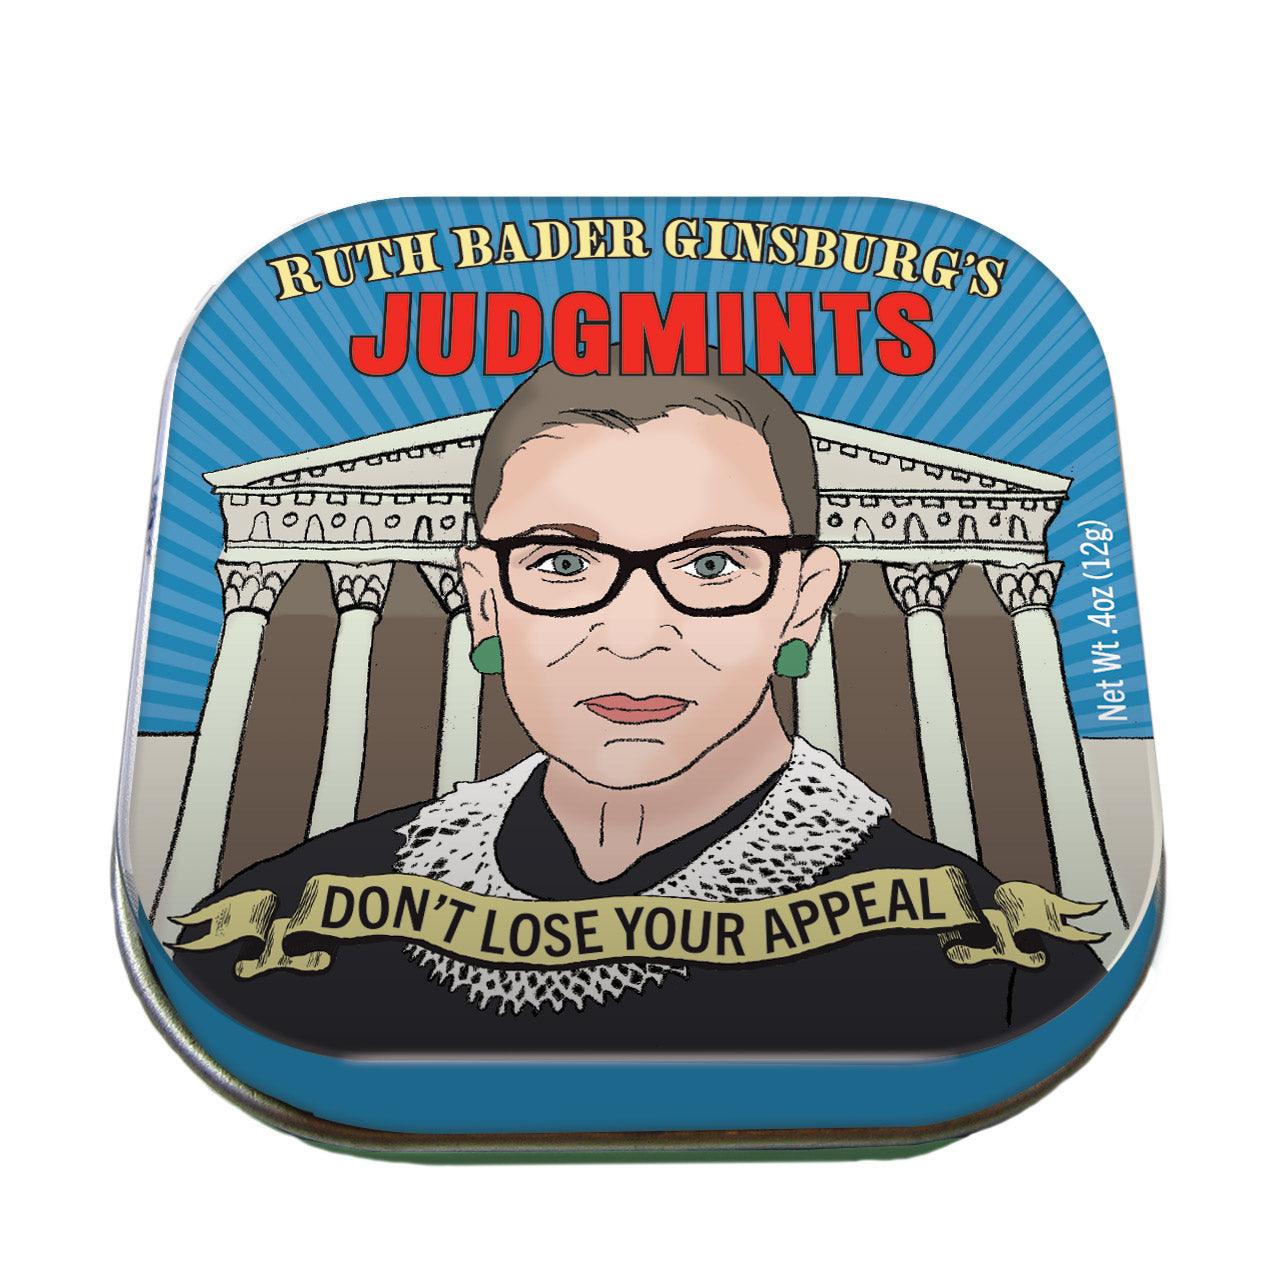 Product photo of Ruth Bader Ginsburg's Judgmints, a novelty gift manufactured by The Unemployed Philosophers Guild.